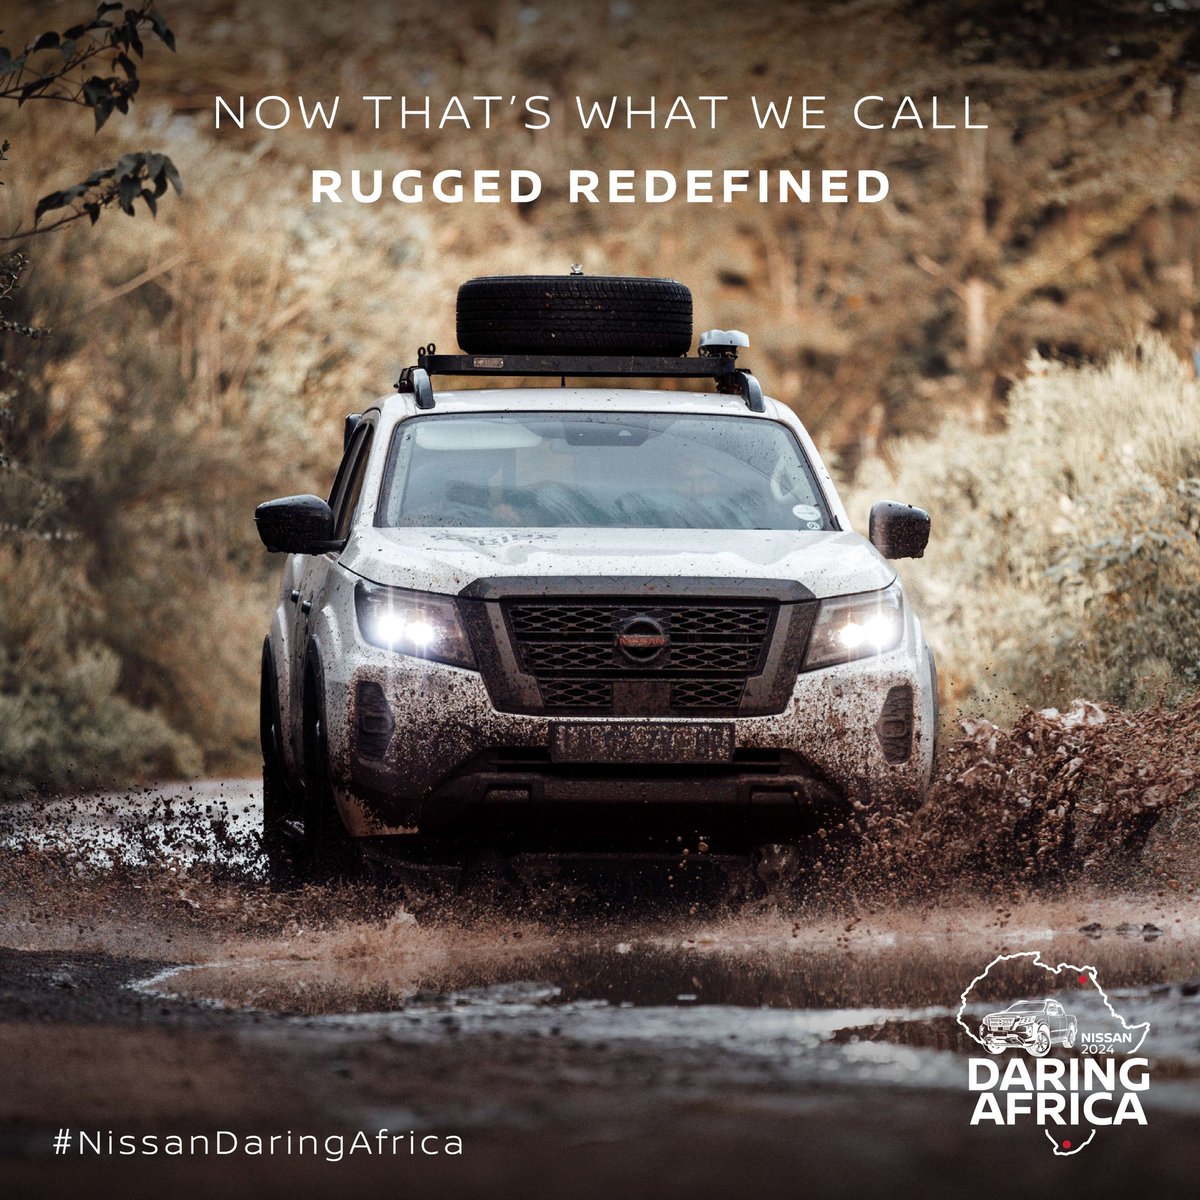 Rugged redefined by the Nissan Navara: Is the knowing that whatever you want to do and wherever you want to go, you can count on the Nissan Navara to get you there. nissanafrica.com/en/experience-… @Weg_Ry_en_Sleep #nissandaringafrica #nissannavara #daretomove